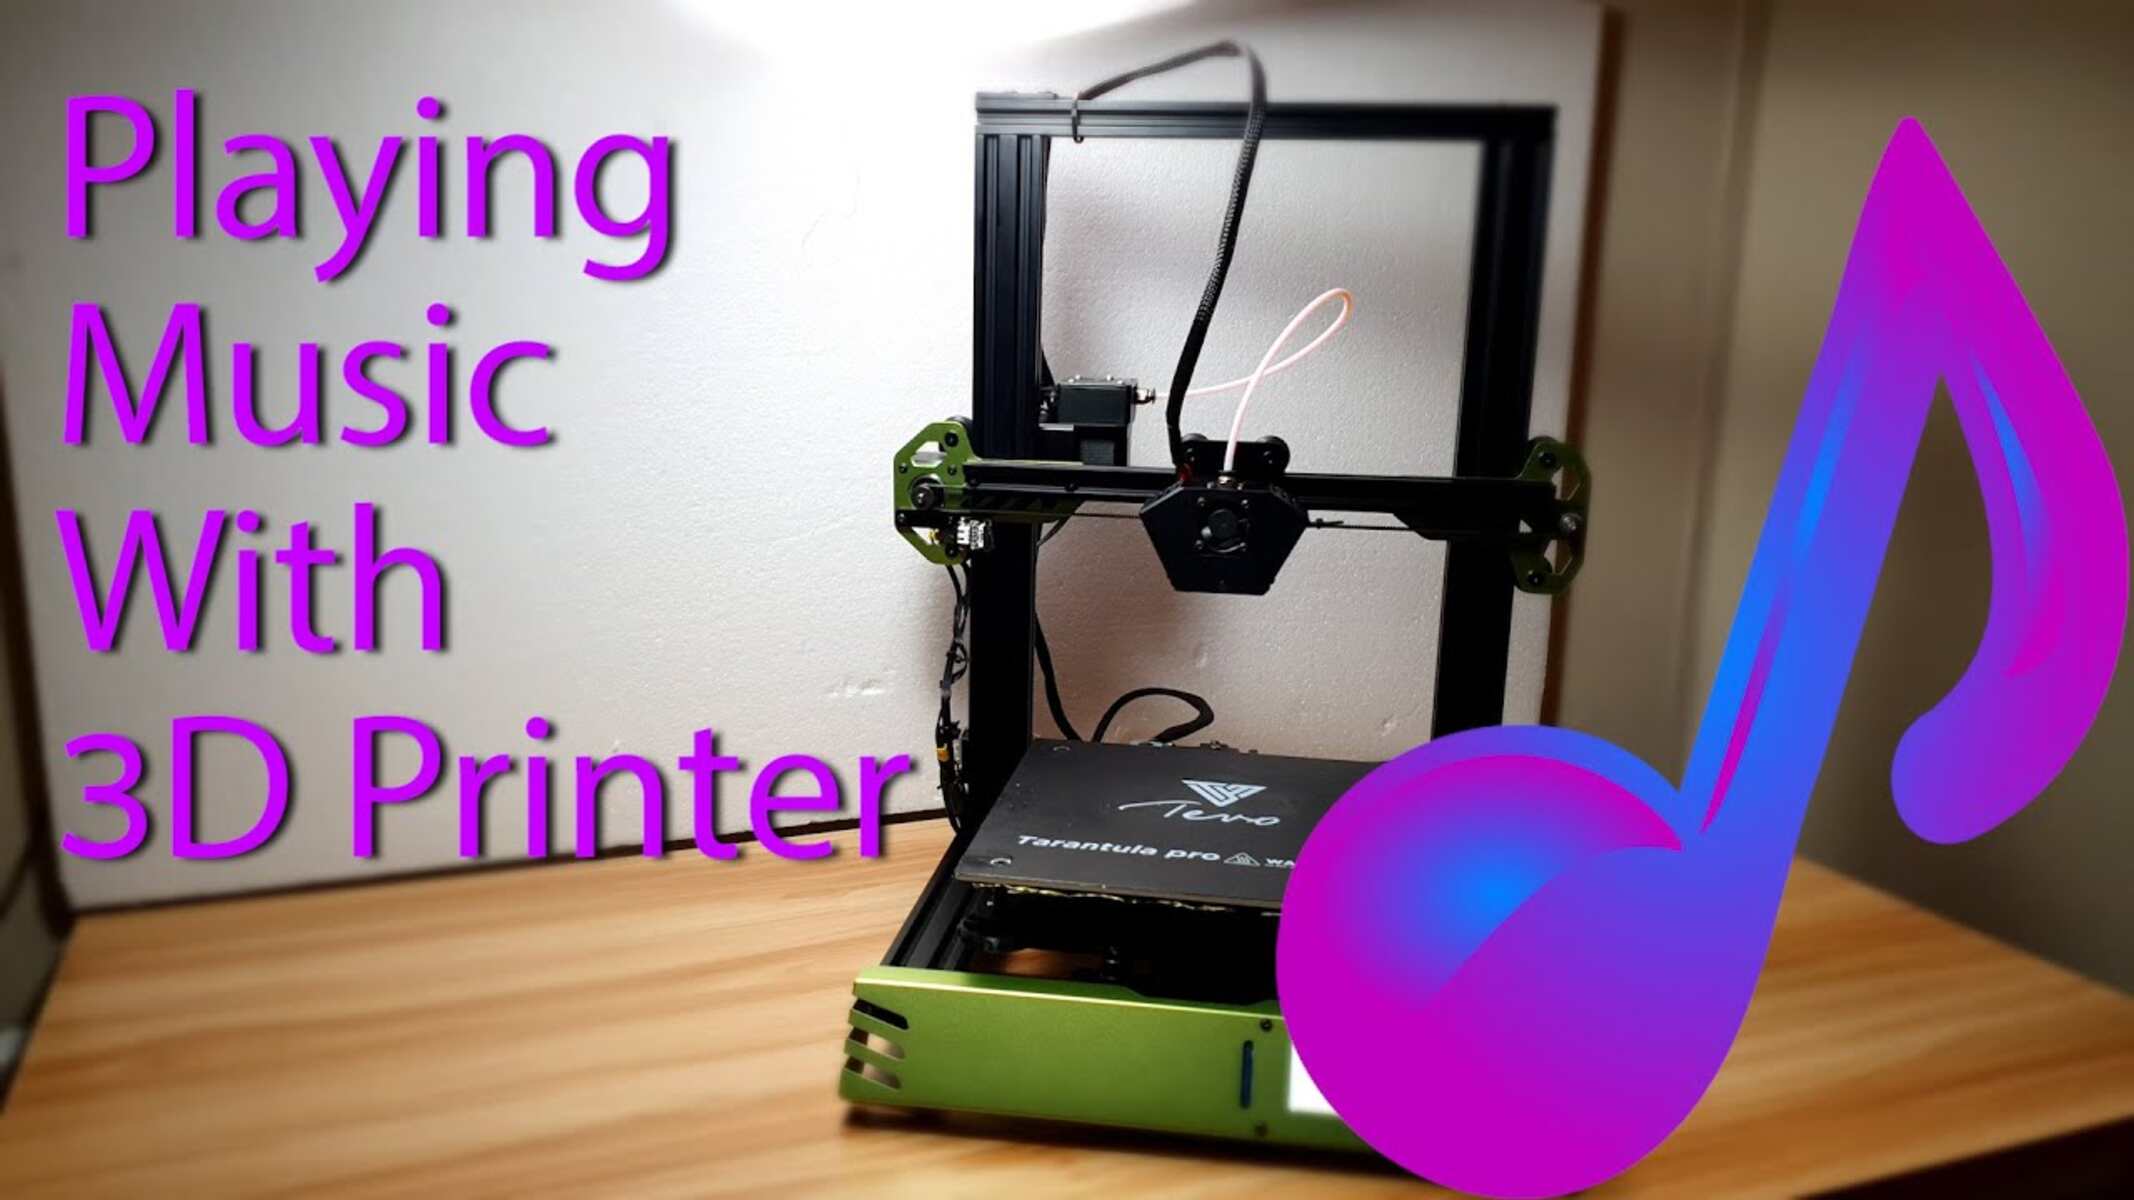 How To Play Music With A 3D Printer